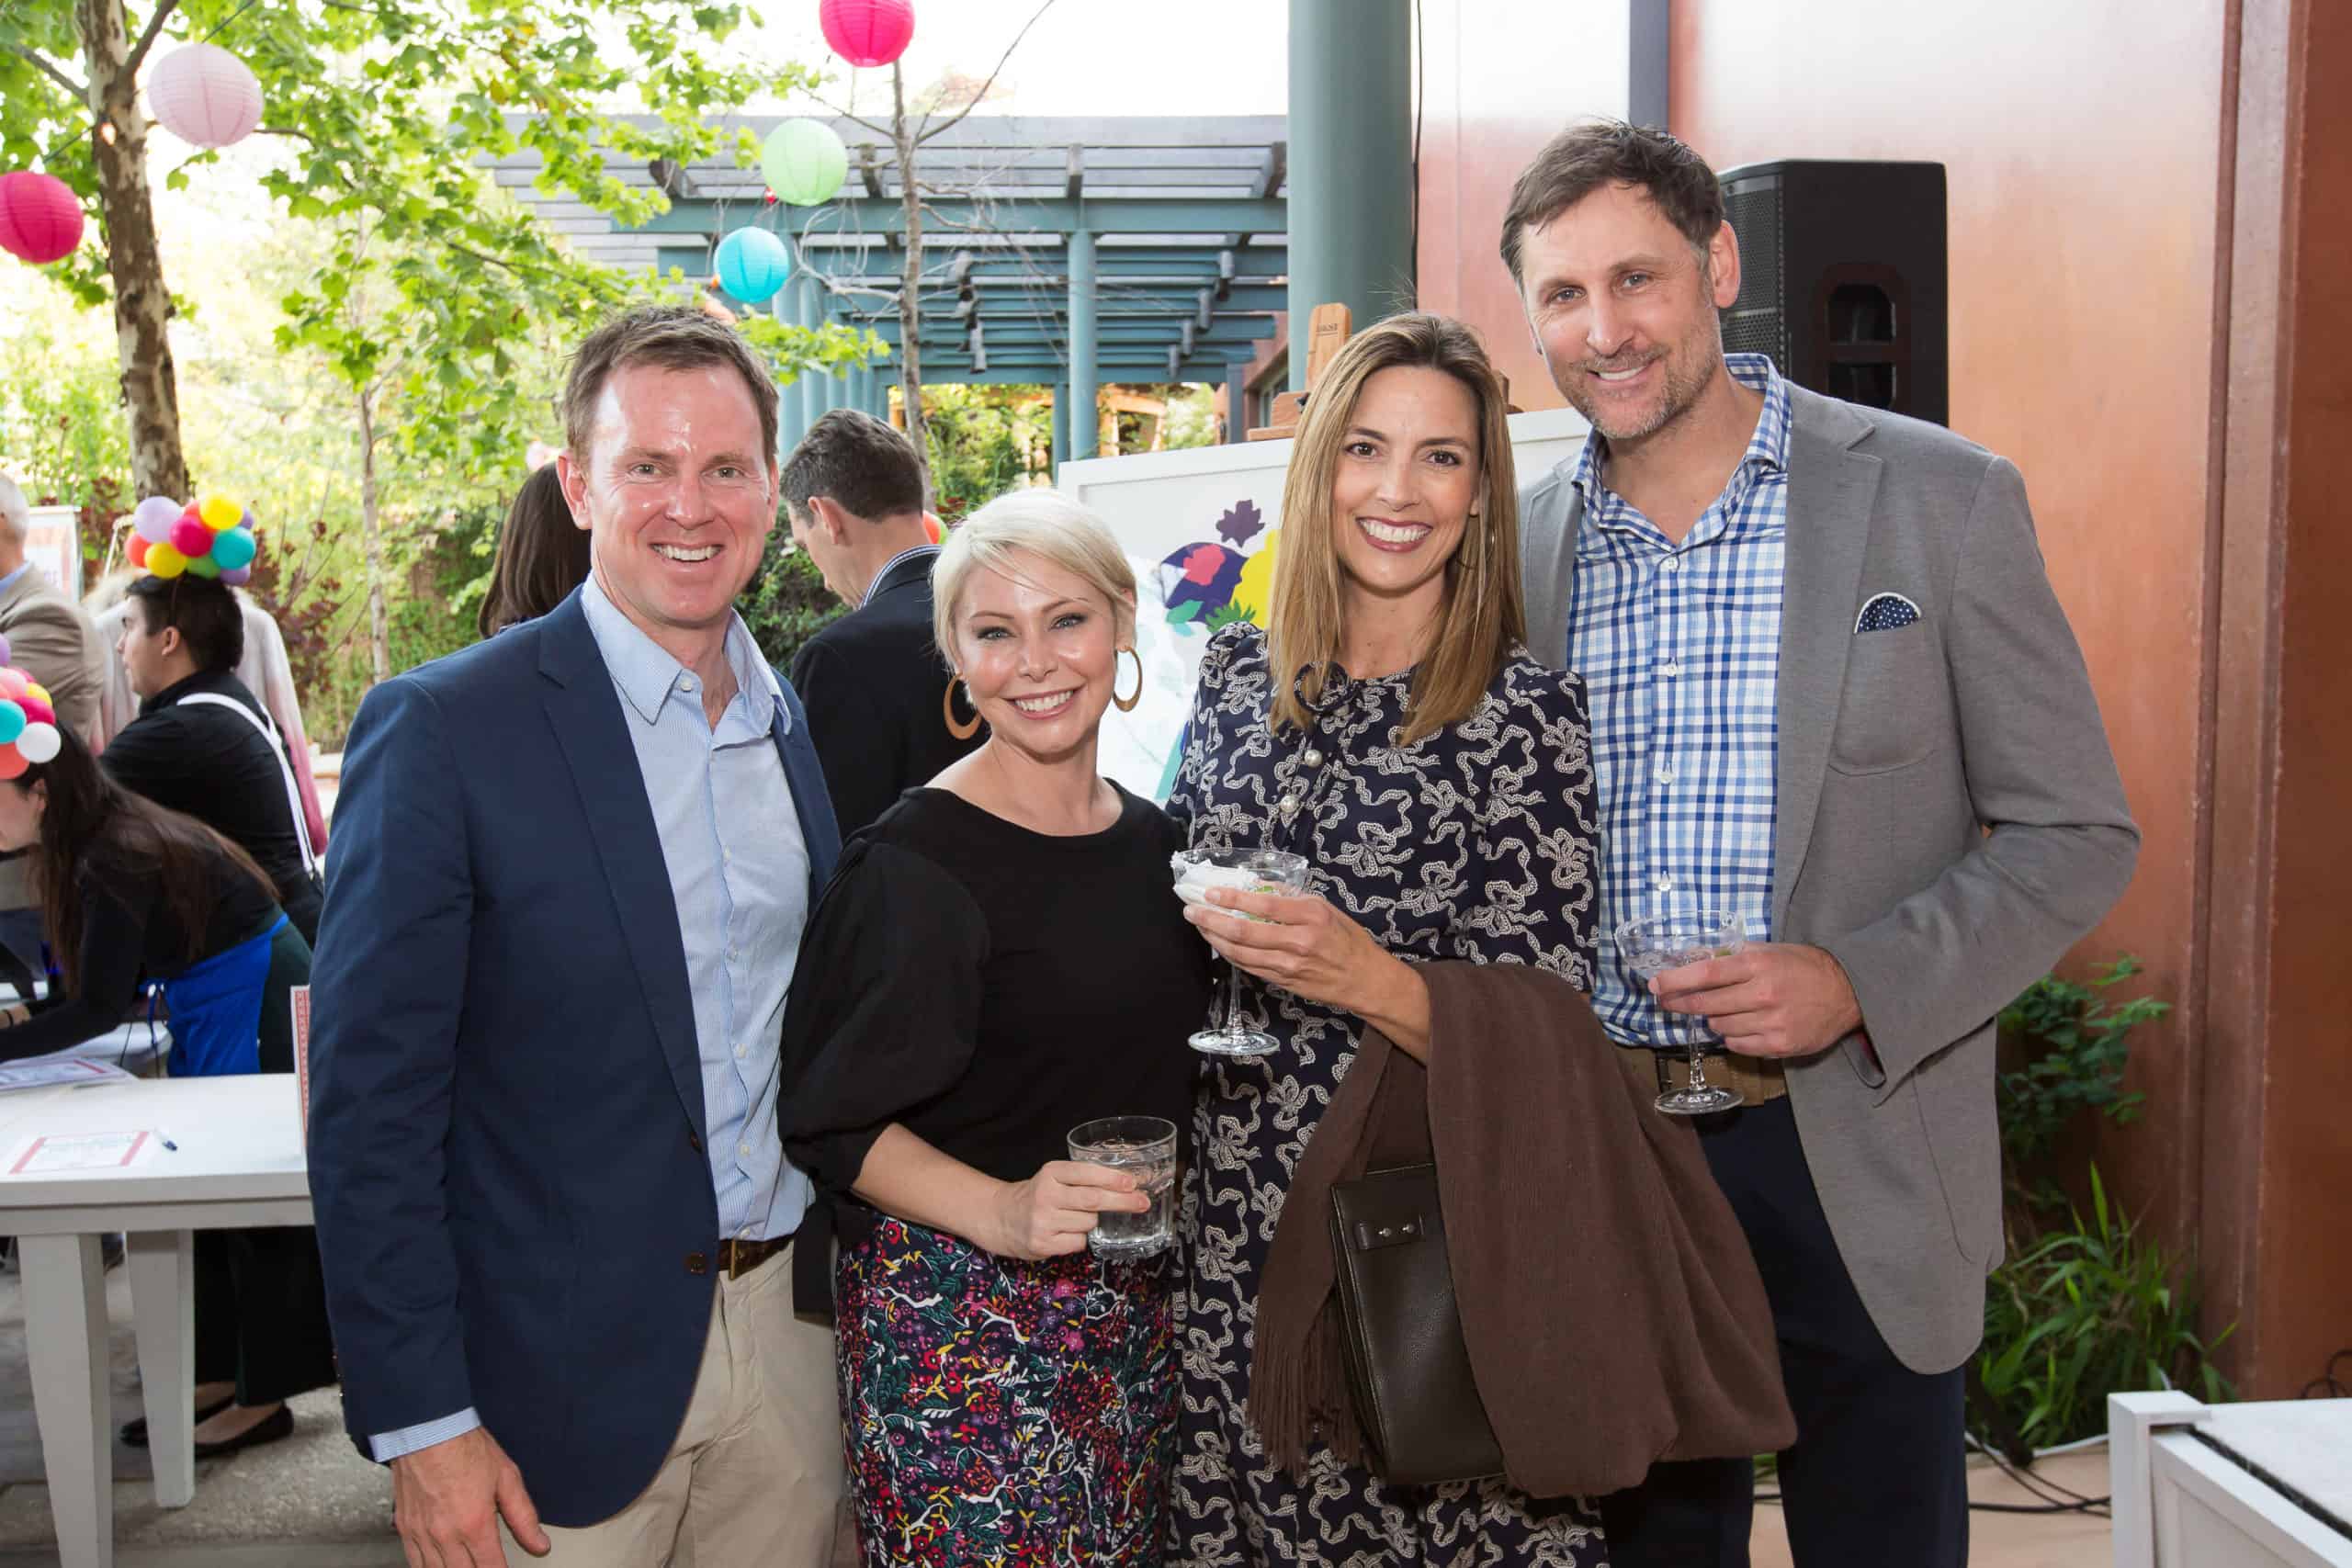 Waddy and Alexis Armstrong, Tanya Fenderbosch and Brent Barry